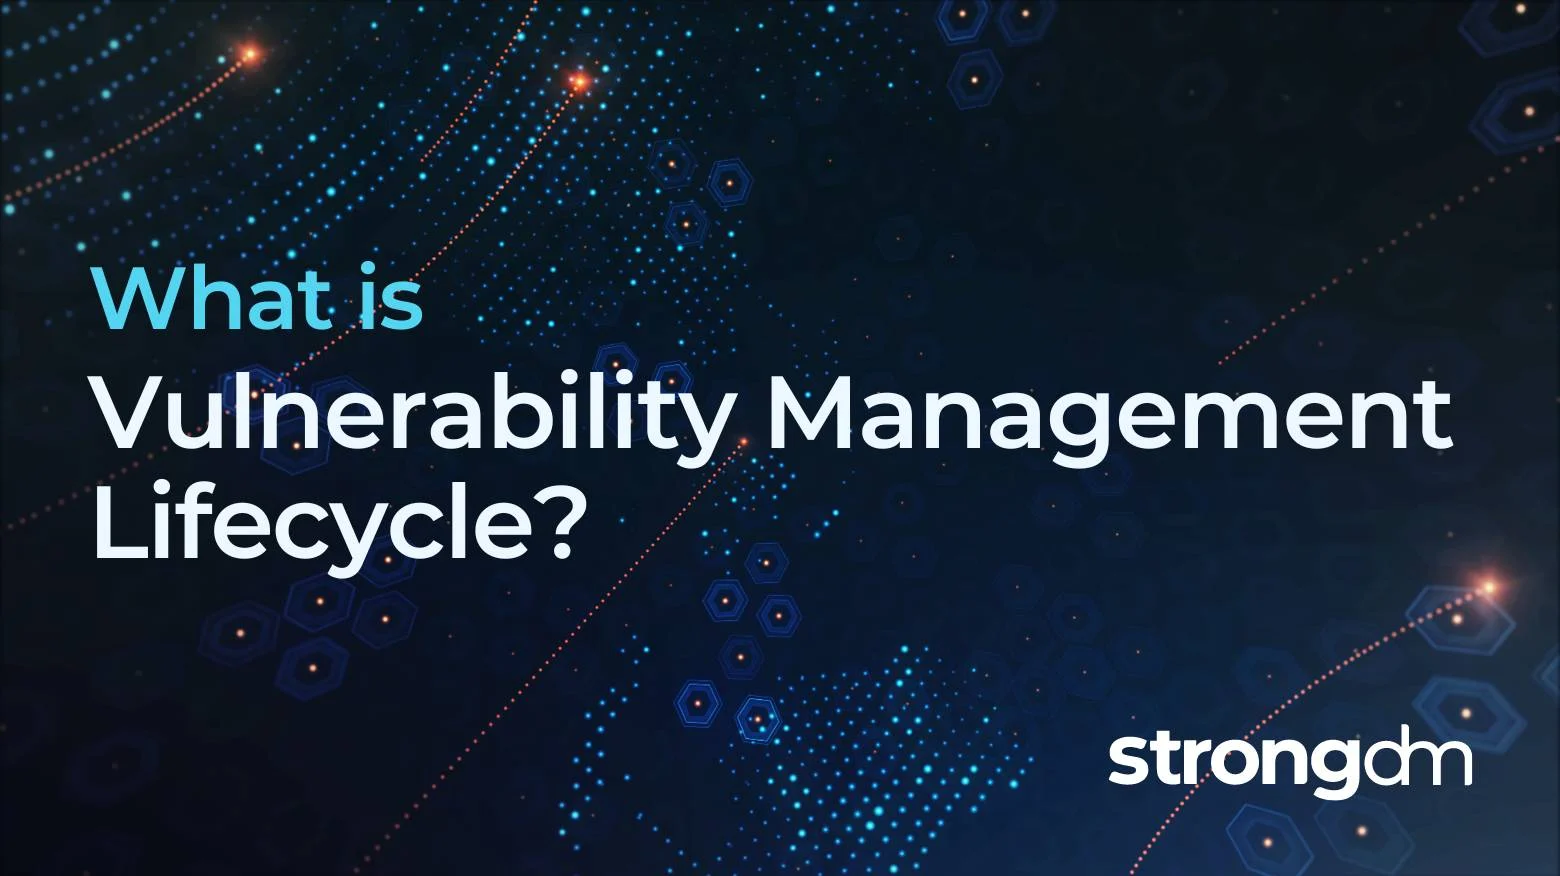 What is a Vulnerability Management Lifecycle?